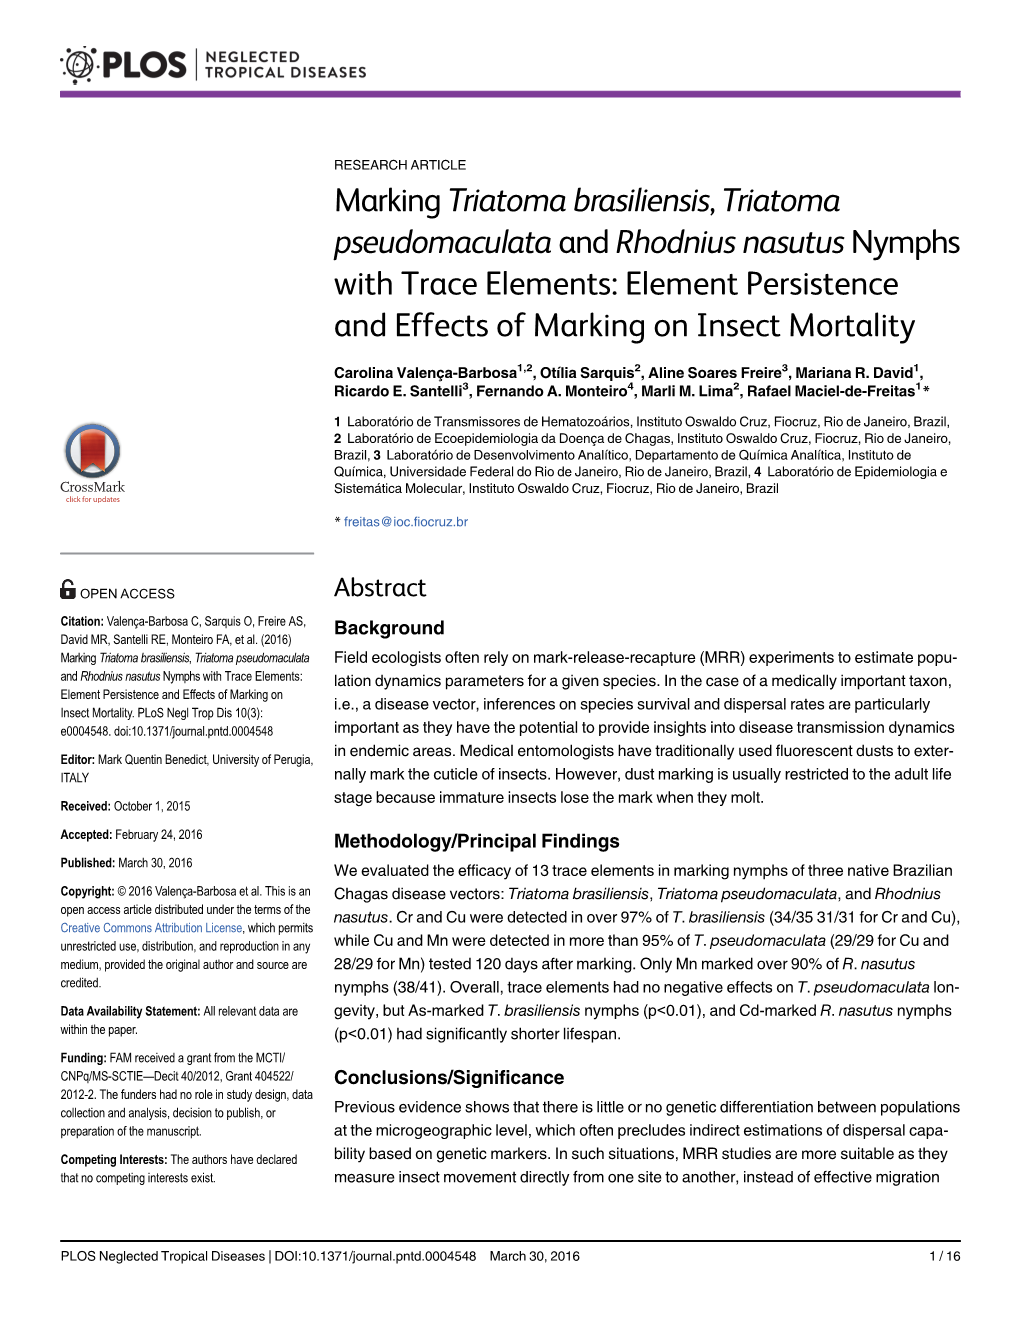 Marking Triatoma Brasiliensis, Triatoma Pseudomaculata and Rhodnius Nasutus Nymphs with Trace Elements: Element Persistence and Effects of Marking on Insect Mortality